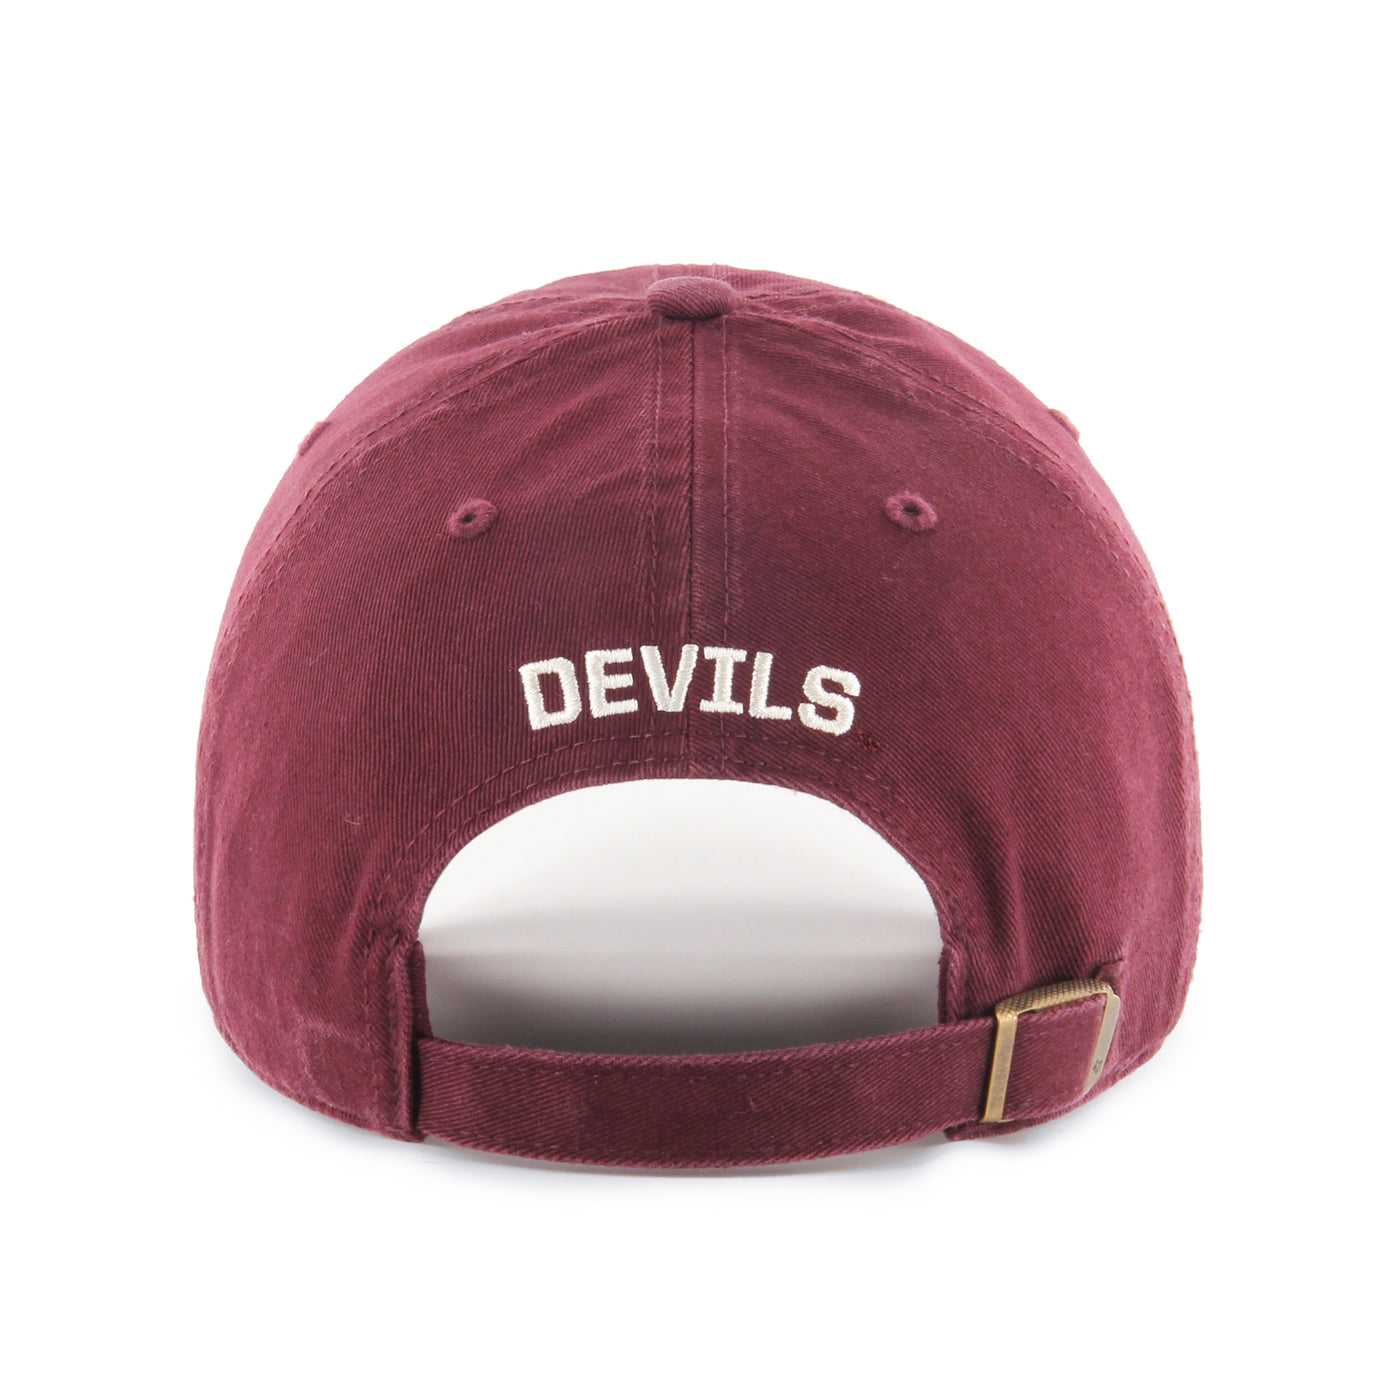 ASU maroon hate backside. Features devils embroidered in white over the back hole. 